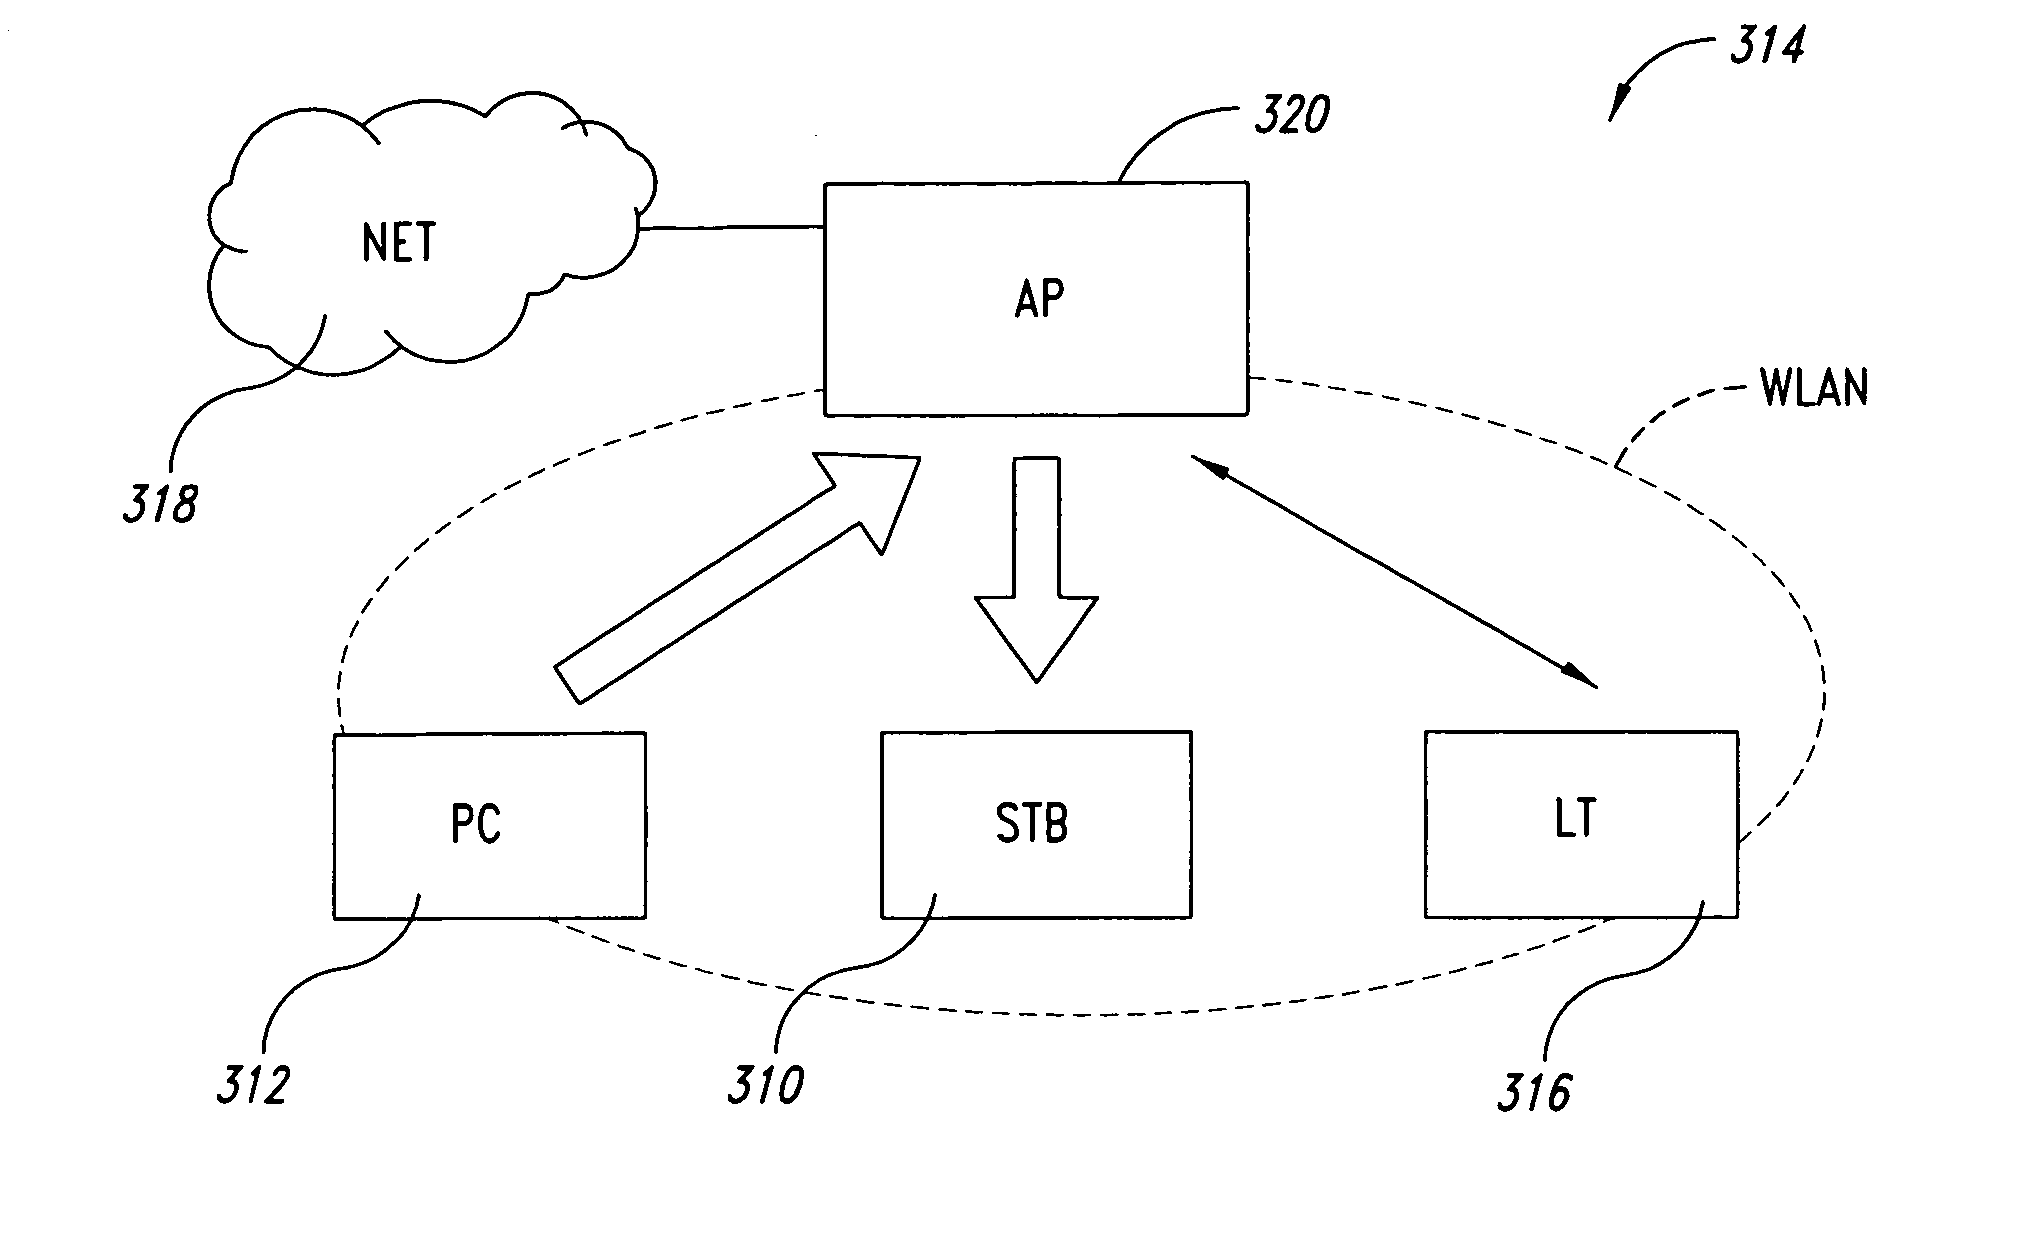 Method and system for admission control in communication networks, related network and computer program product therefor